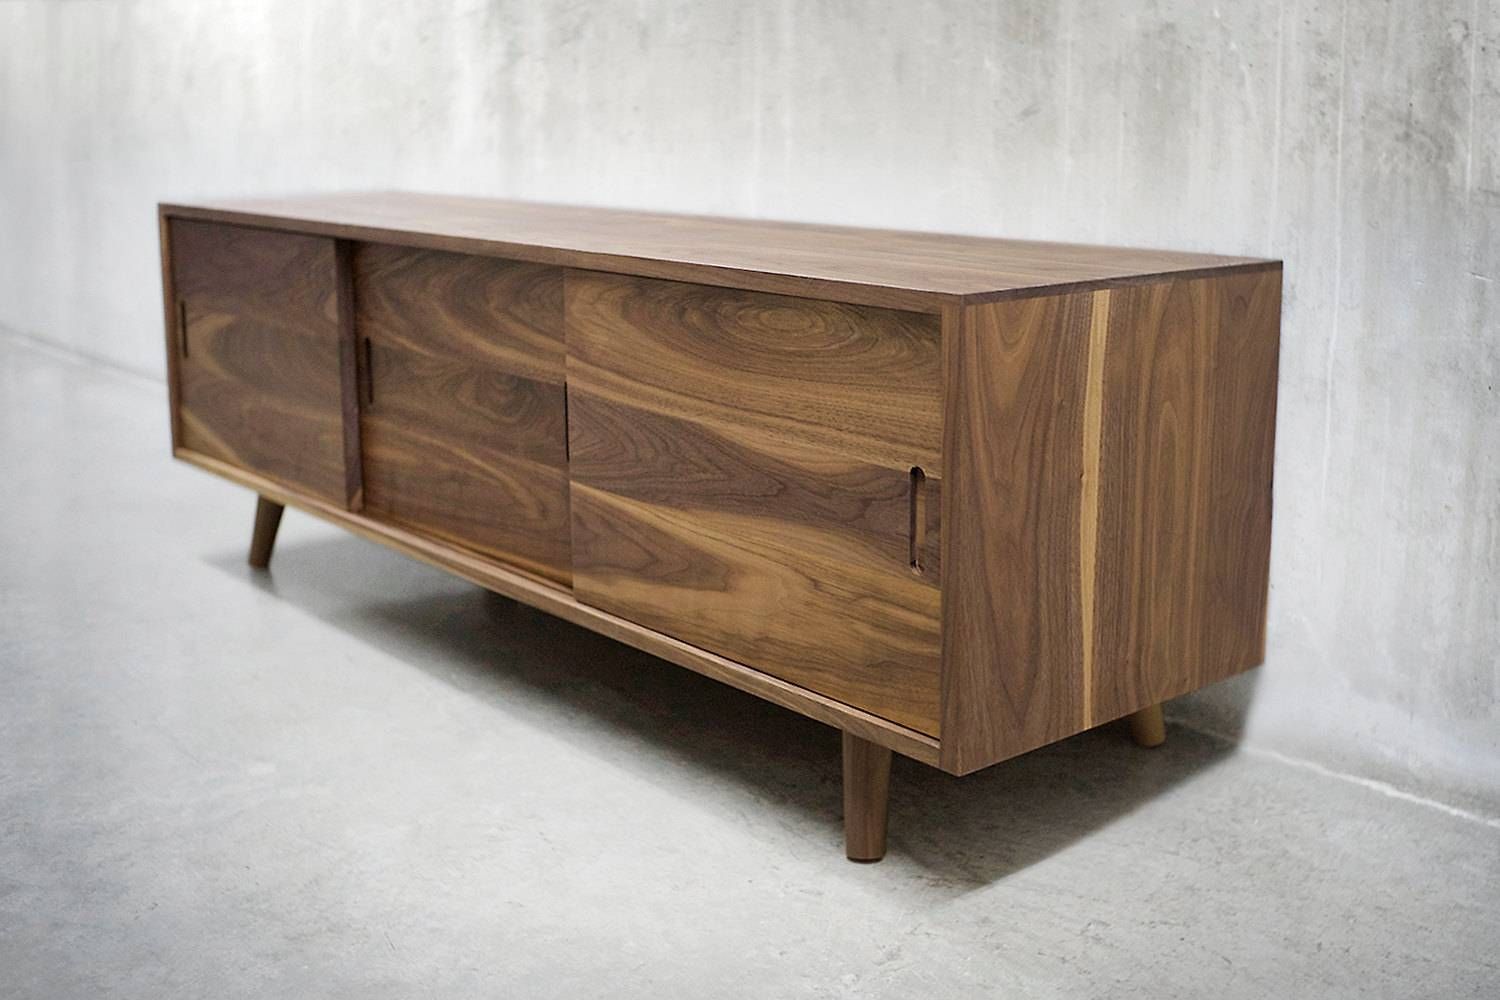 60 Solid Black Walnut Credenza/ Sideboard/ Cabinet/ Pertaining To Black And Walnut Sideboard (View 4 of 20)